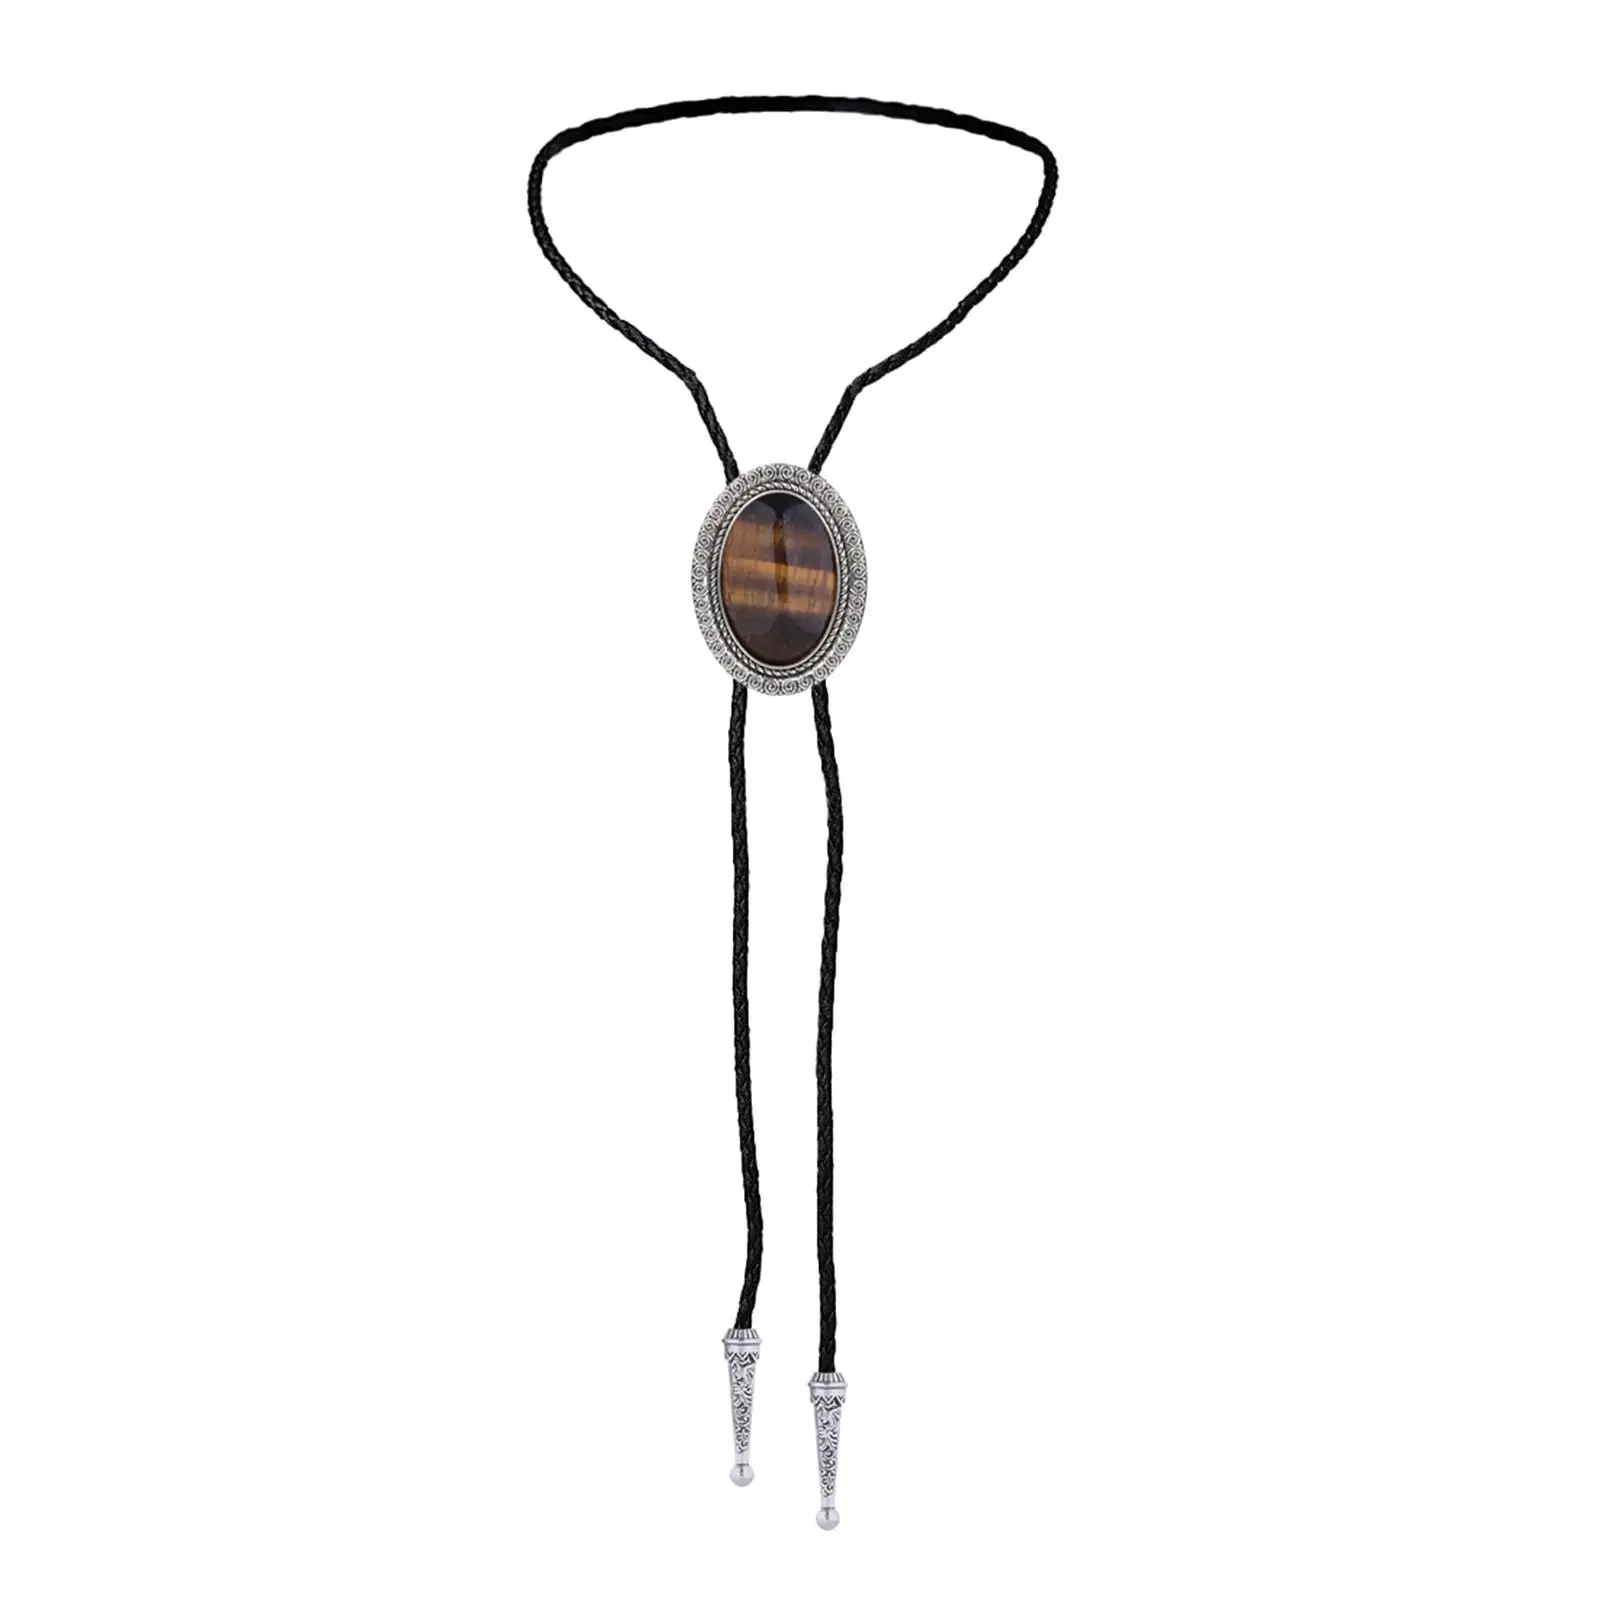 Bolo Tie for Men Women Necktie with Stone Neck Rope Vintage Western Cowboy Adjustable PU Leather Rope Necklace